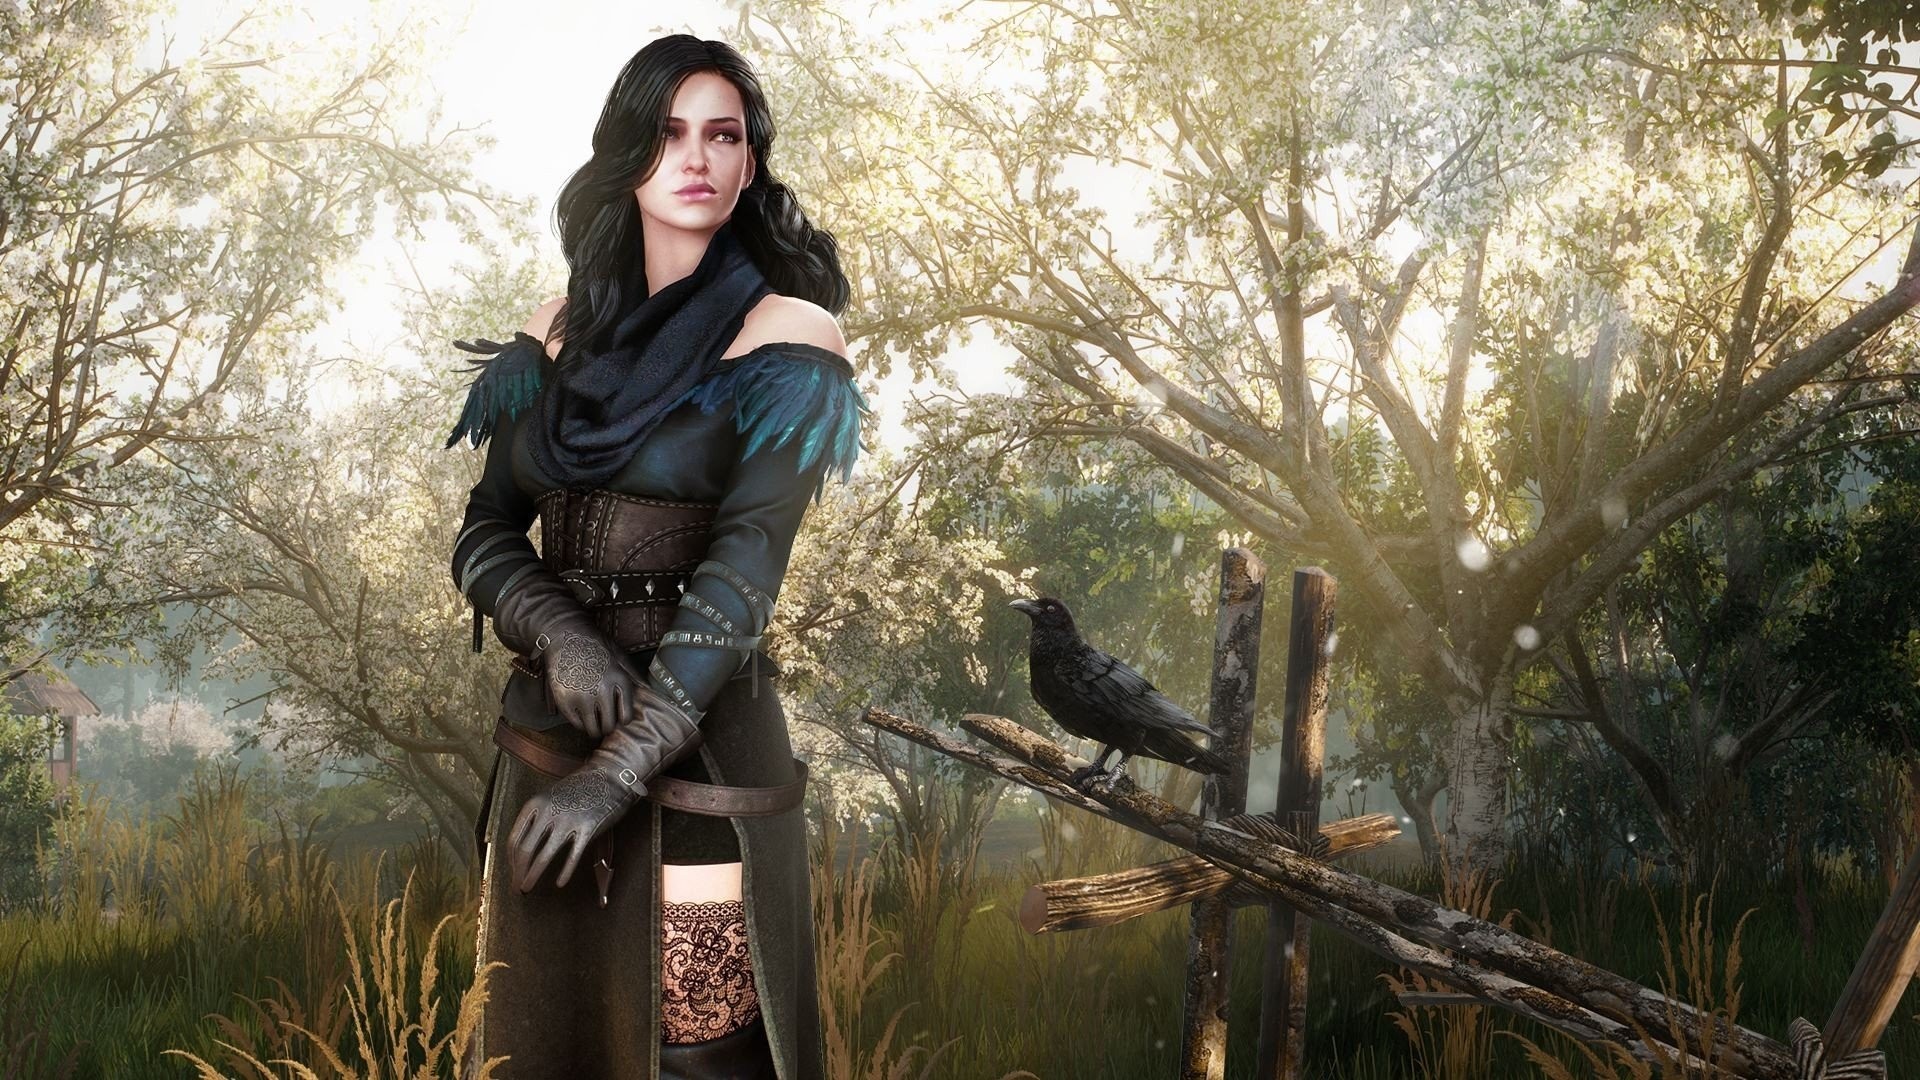 The witcher 3 alternative look for yennefer фото 11